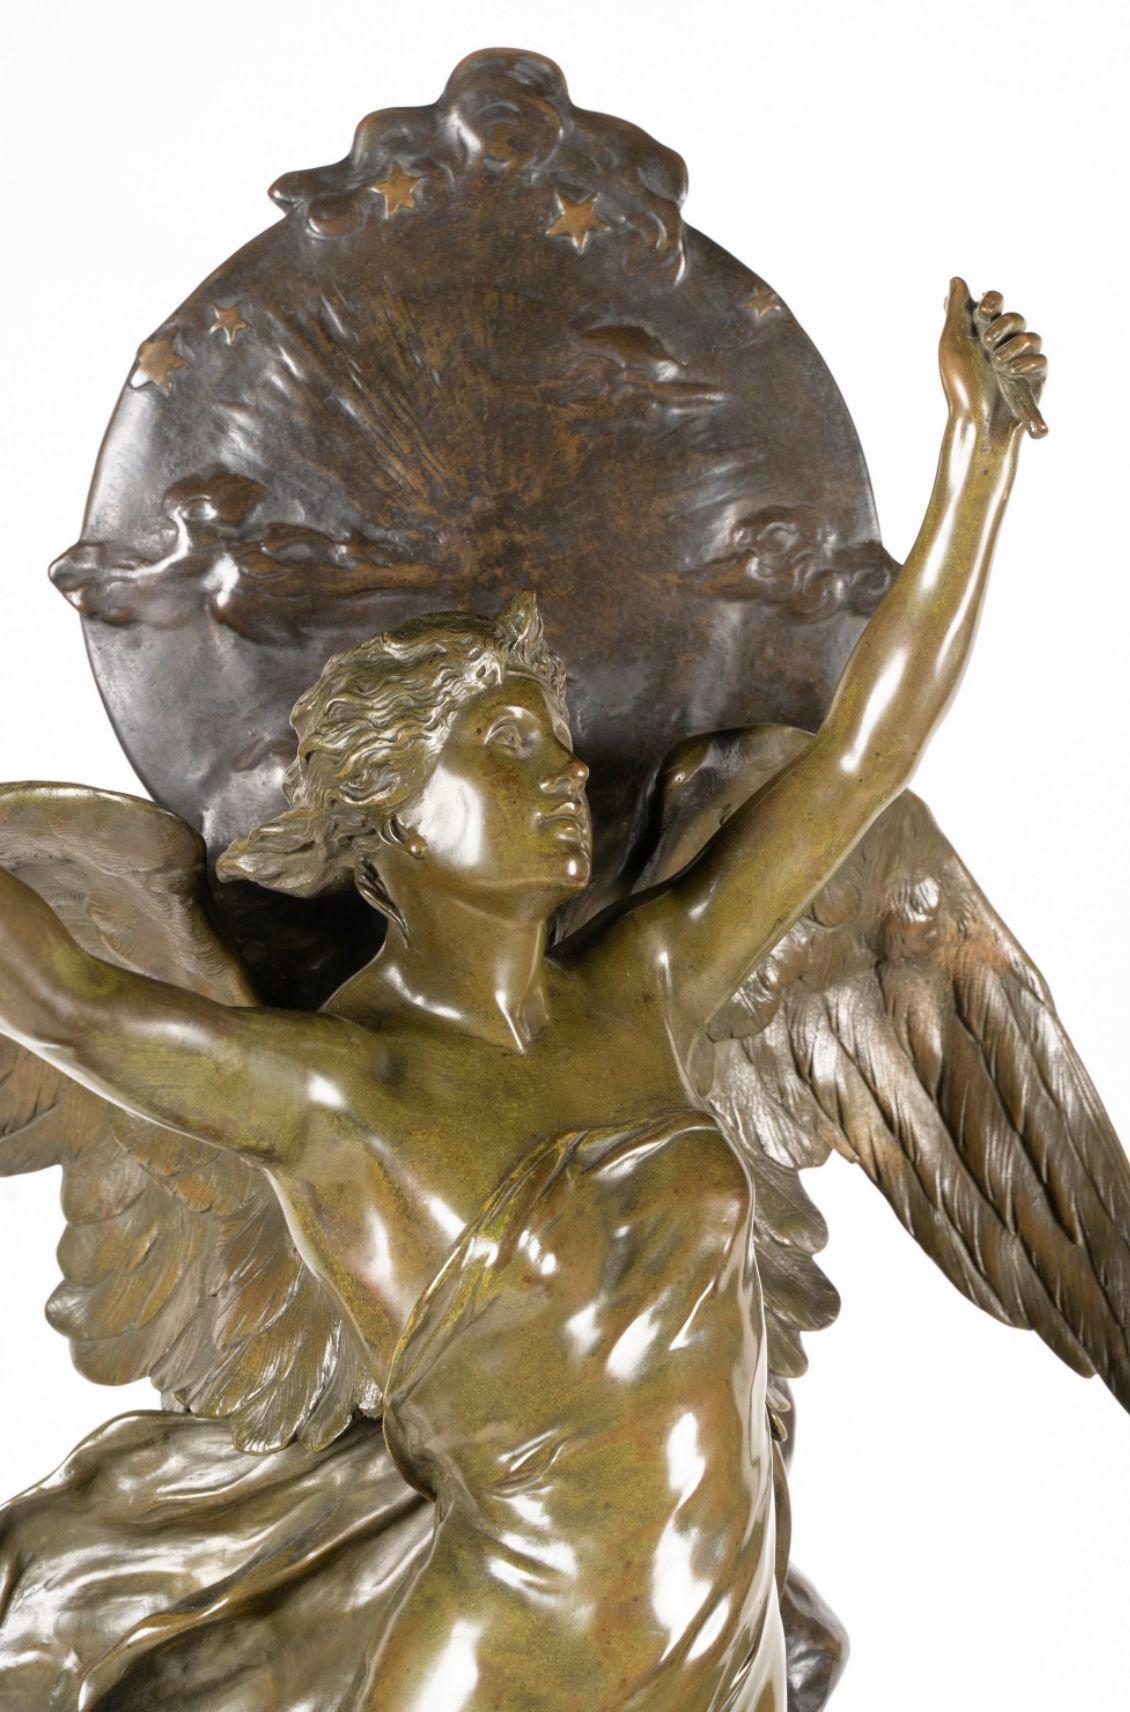 Alluring patinated bronze sculpture by Émile Louis Picault depicting an allegorical figure, a classically draped winged woman, gracefully extending into the air with arms raised. A small plaque depicting clouds and stars create a visual illusion